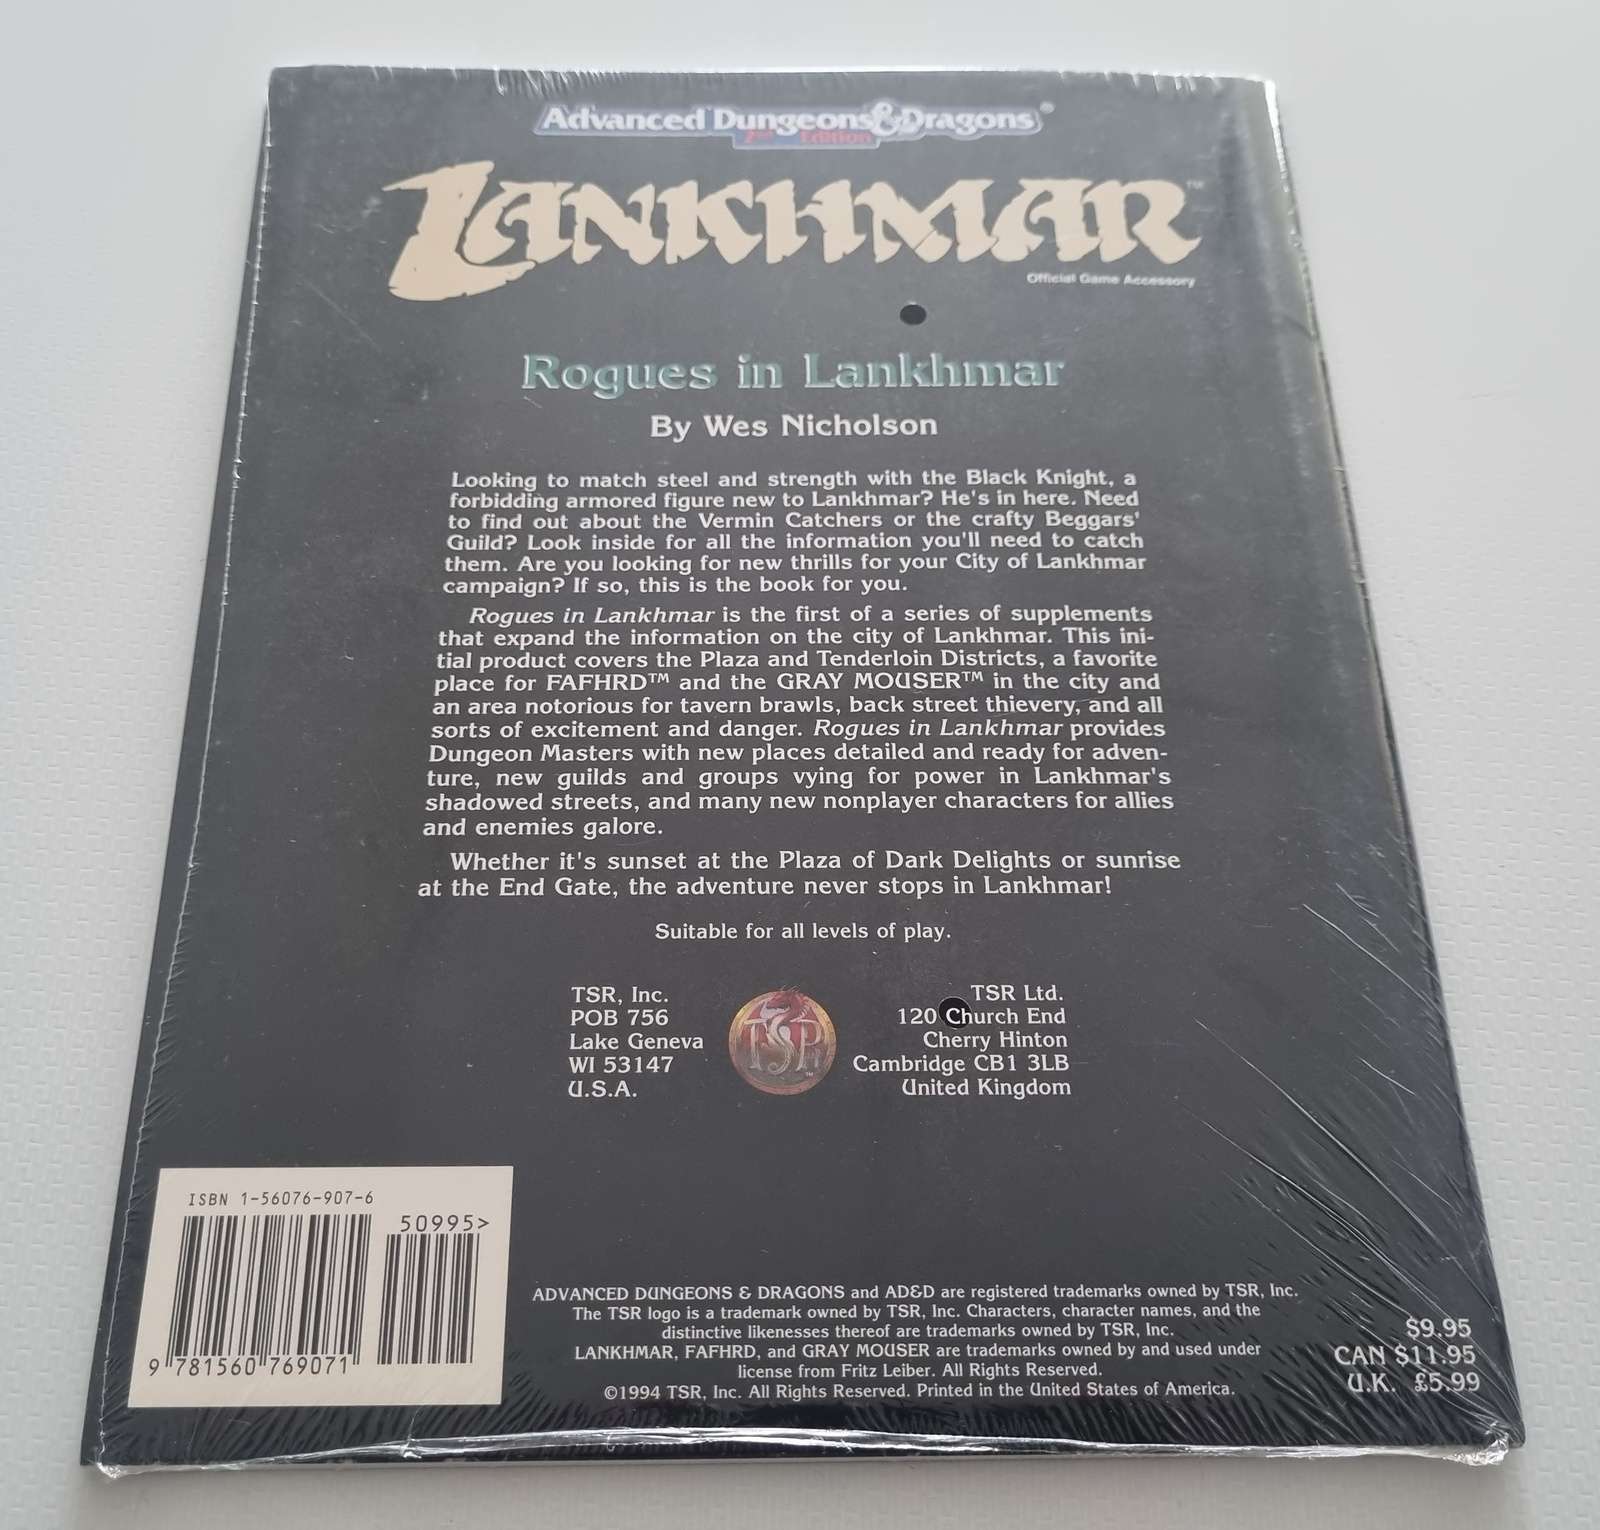 Advanced Dungeons & Dragons Module - Rogues of Lankhmar (Sealed)